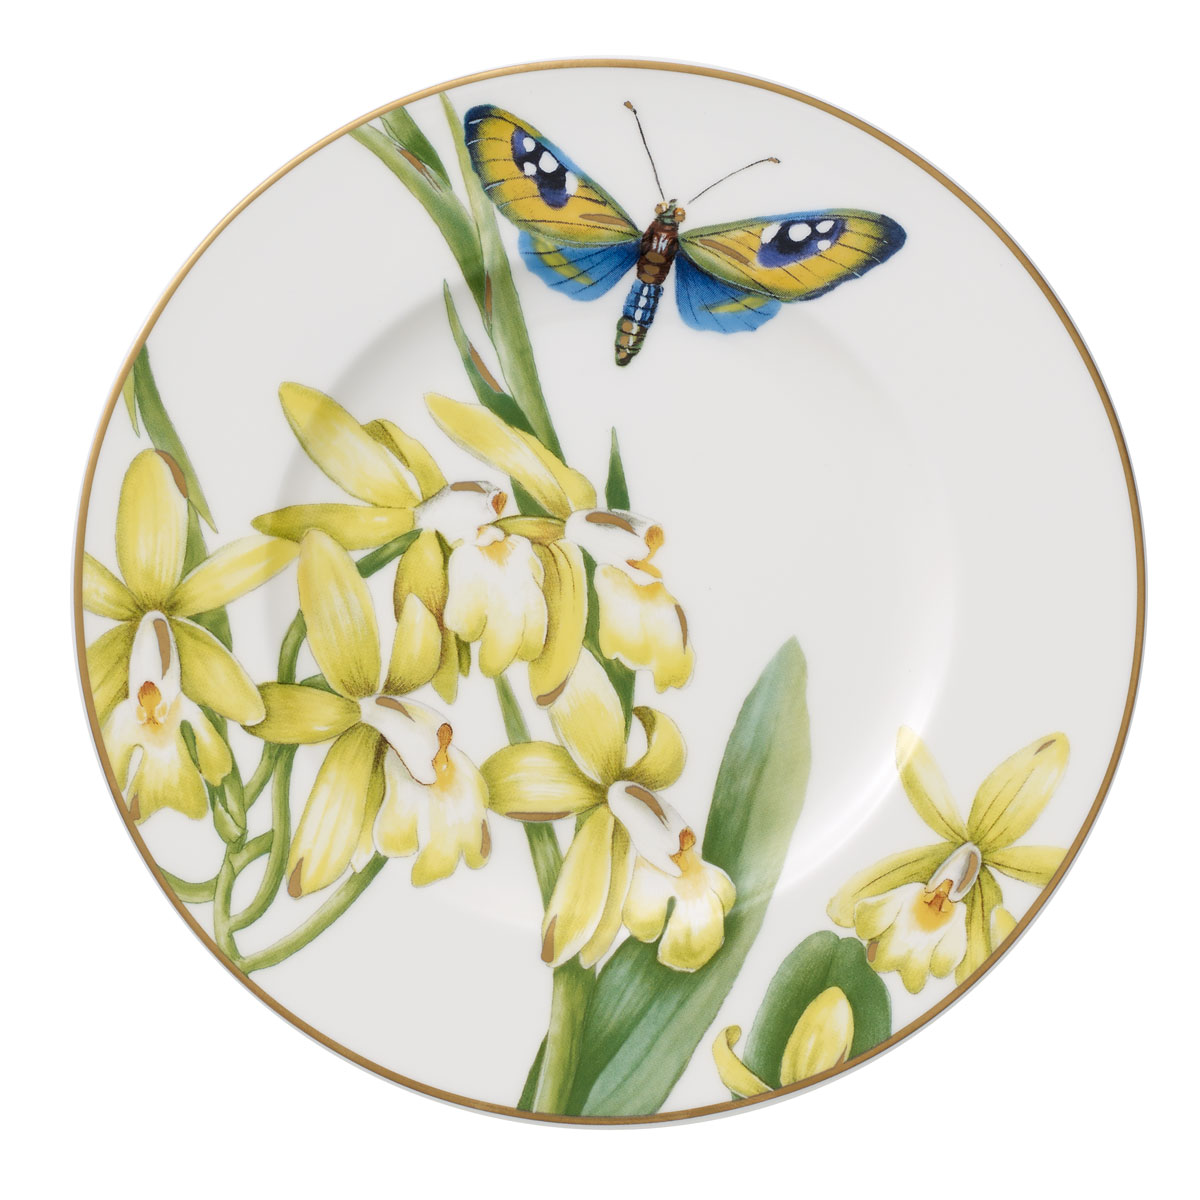 Villeroy and Boch Amazonia Anmut Bread and Butter Plate